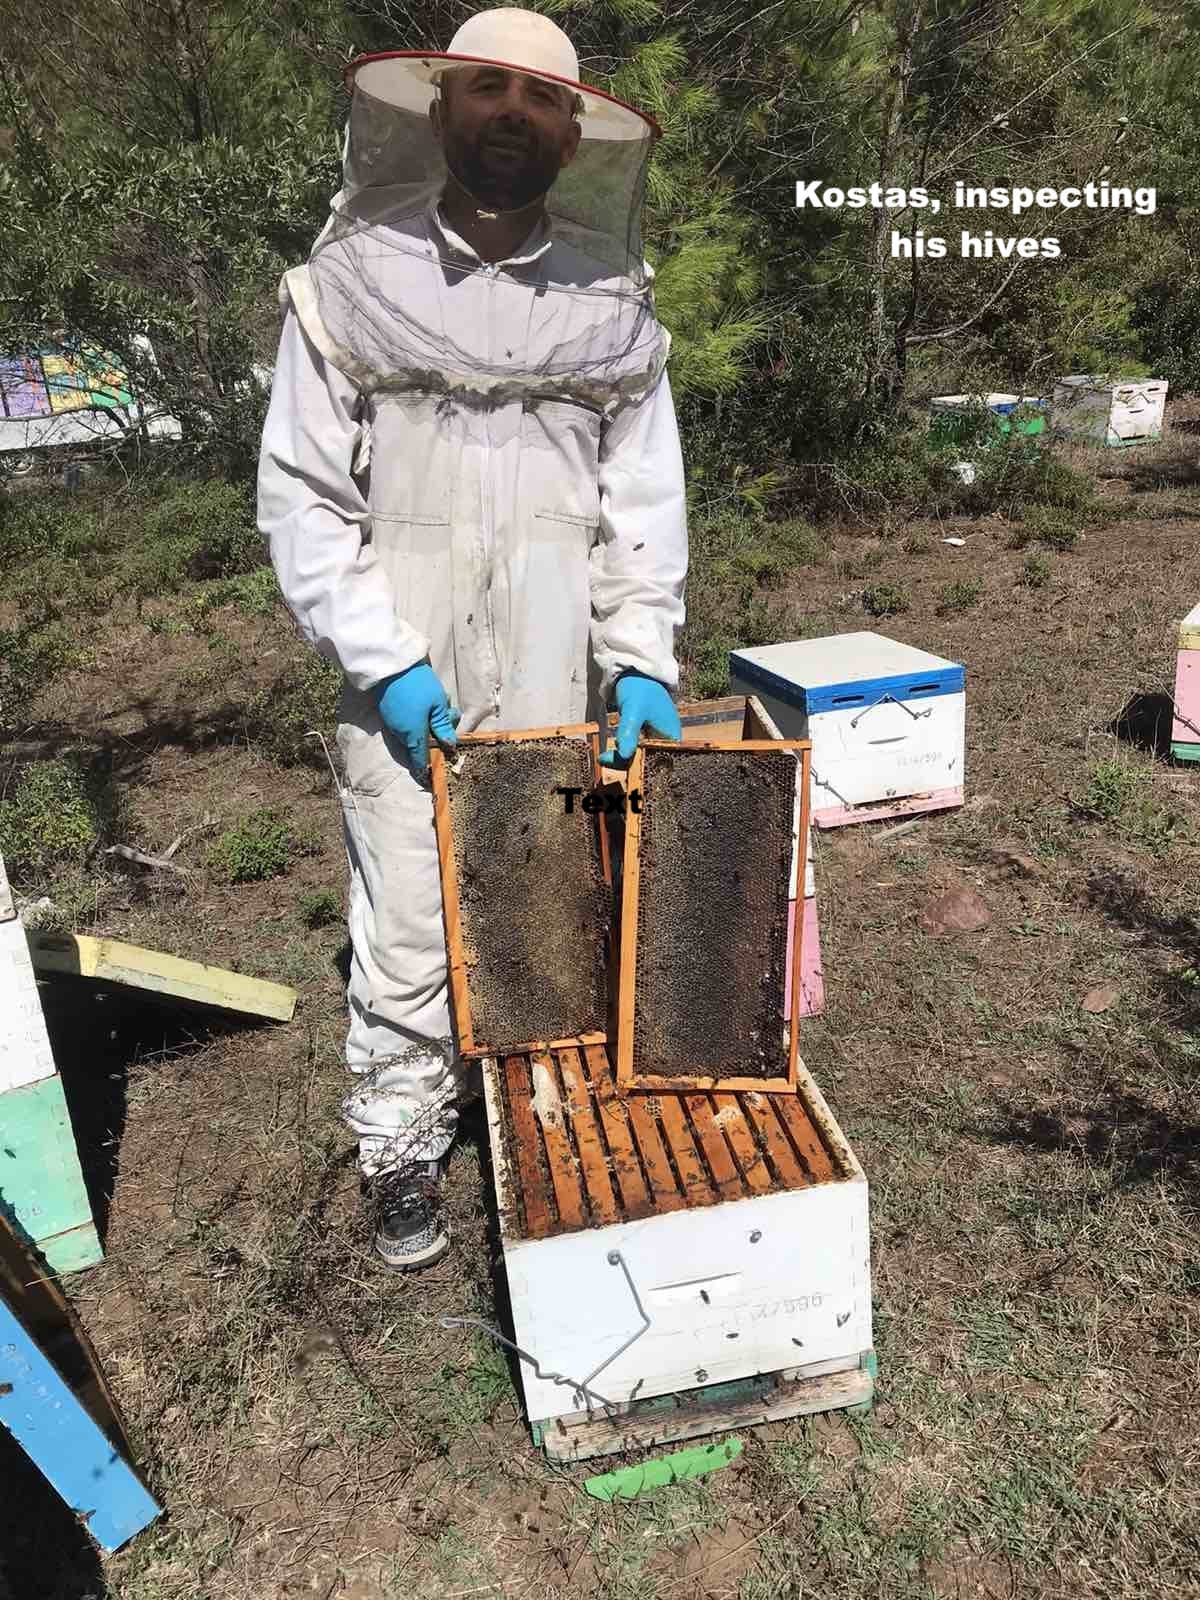 Kostas inspecting his hives